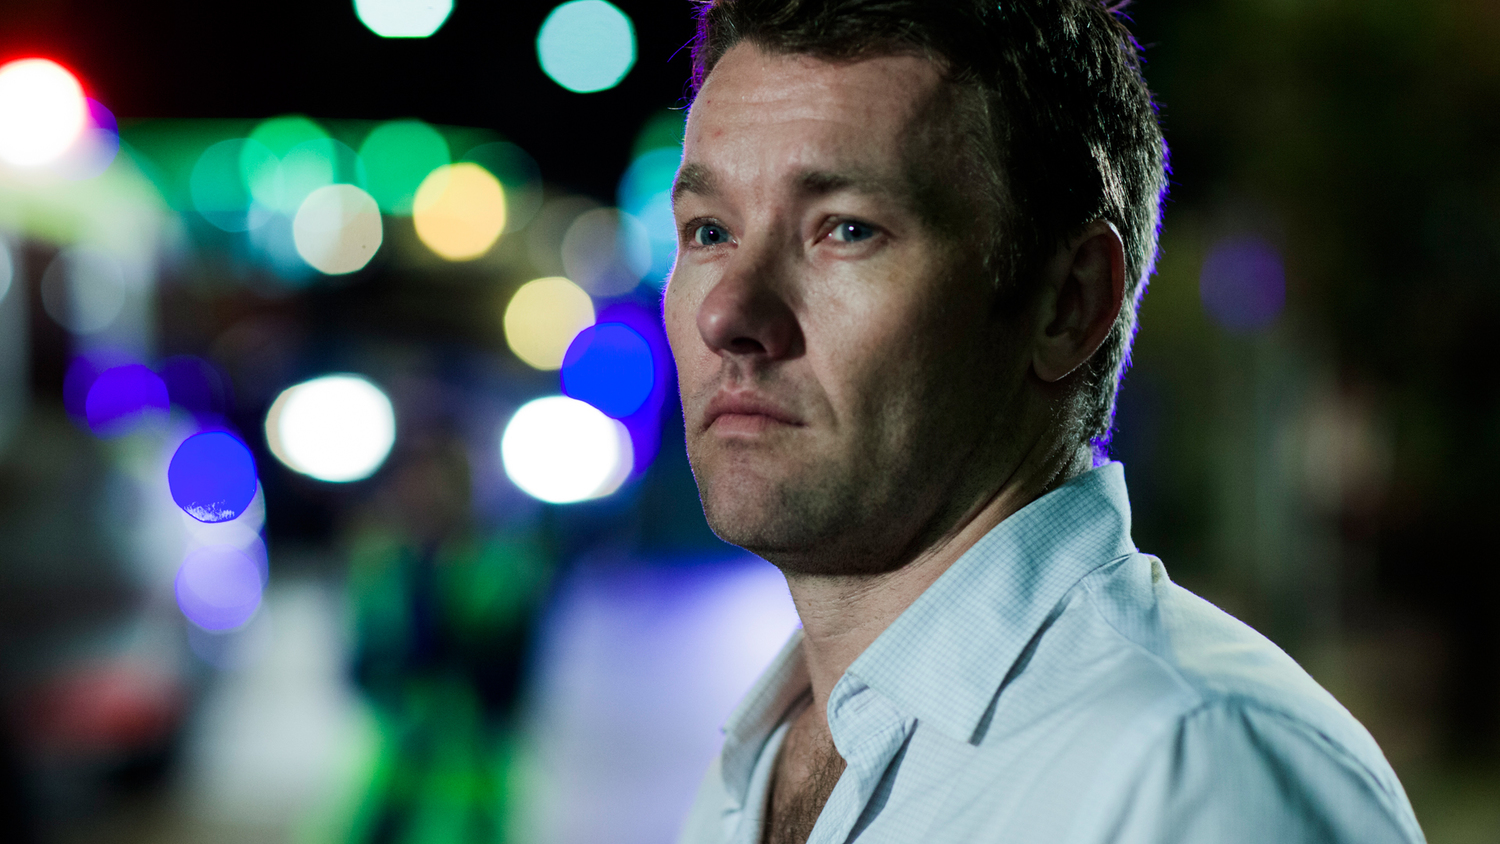 joel-edgerton-will-protect-his-family-in-a24s-thriller-it-comes-at-night-social.jpg